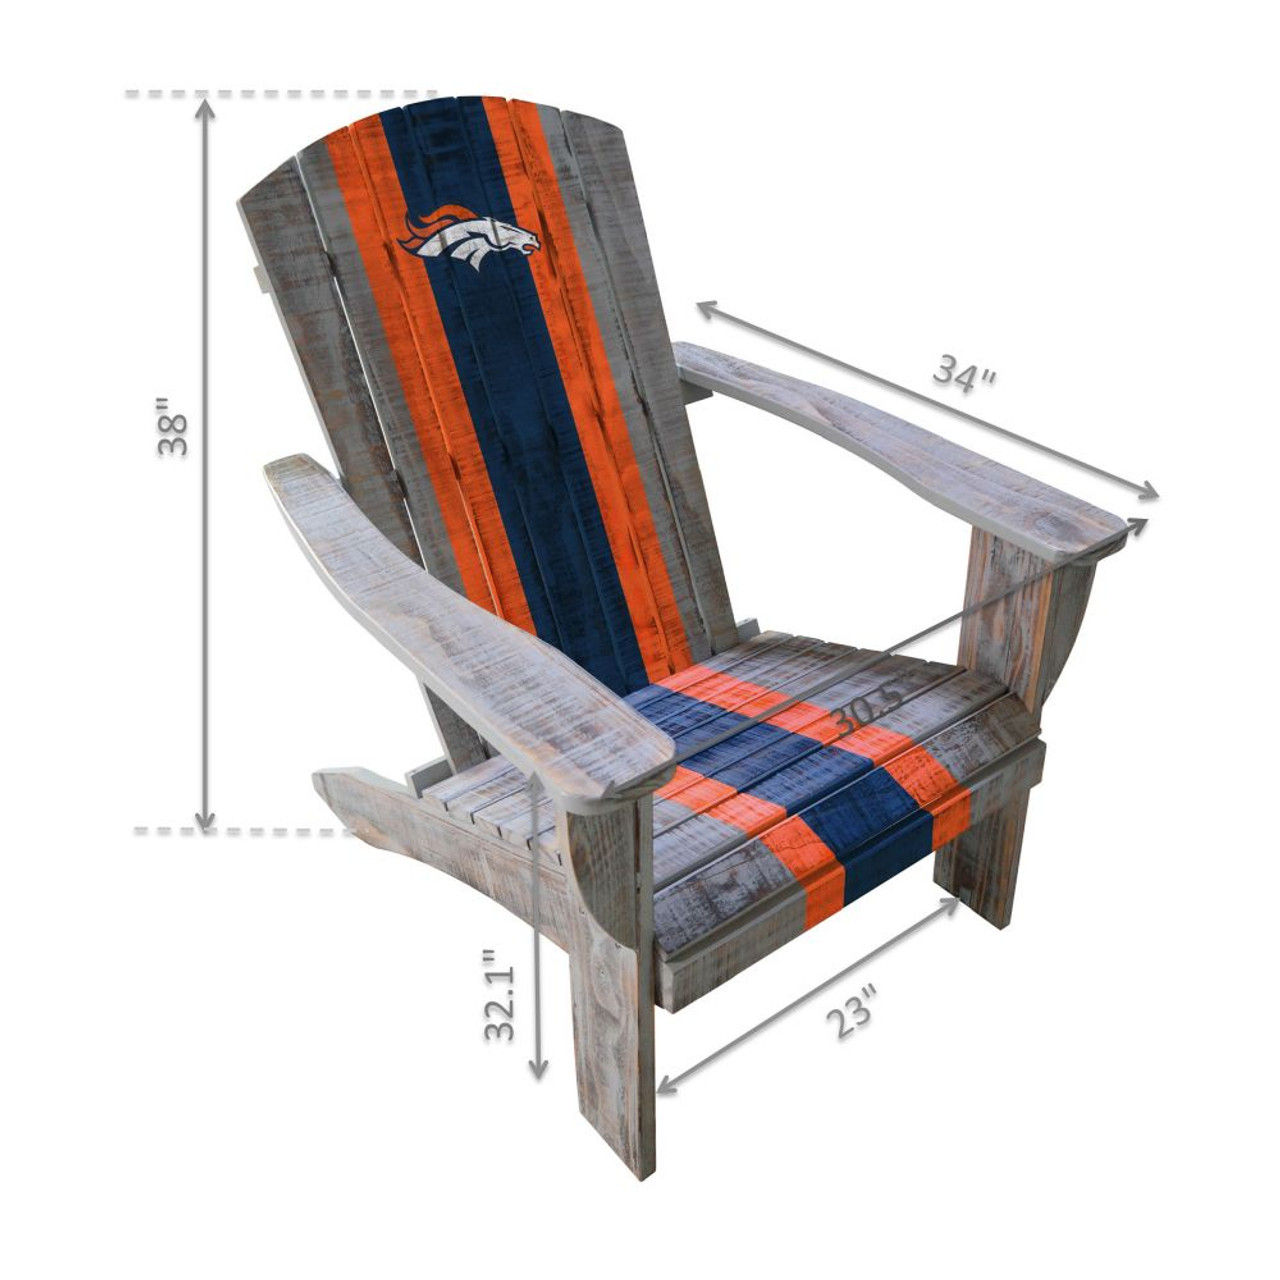 511-1003, Denver, DEN, Broncos, Wood, Adirondack, Chair, NFL, Imperial, FREE SHIPPING, 720801110035